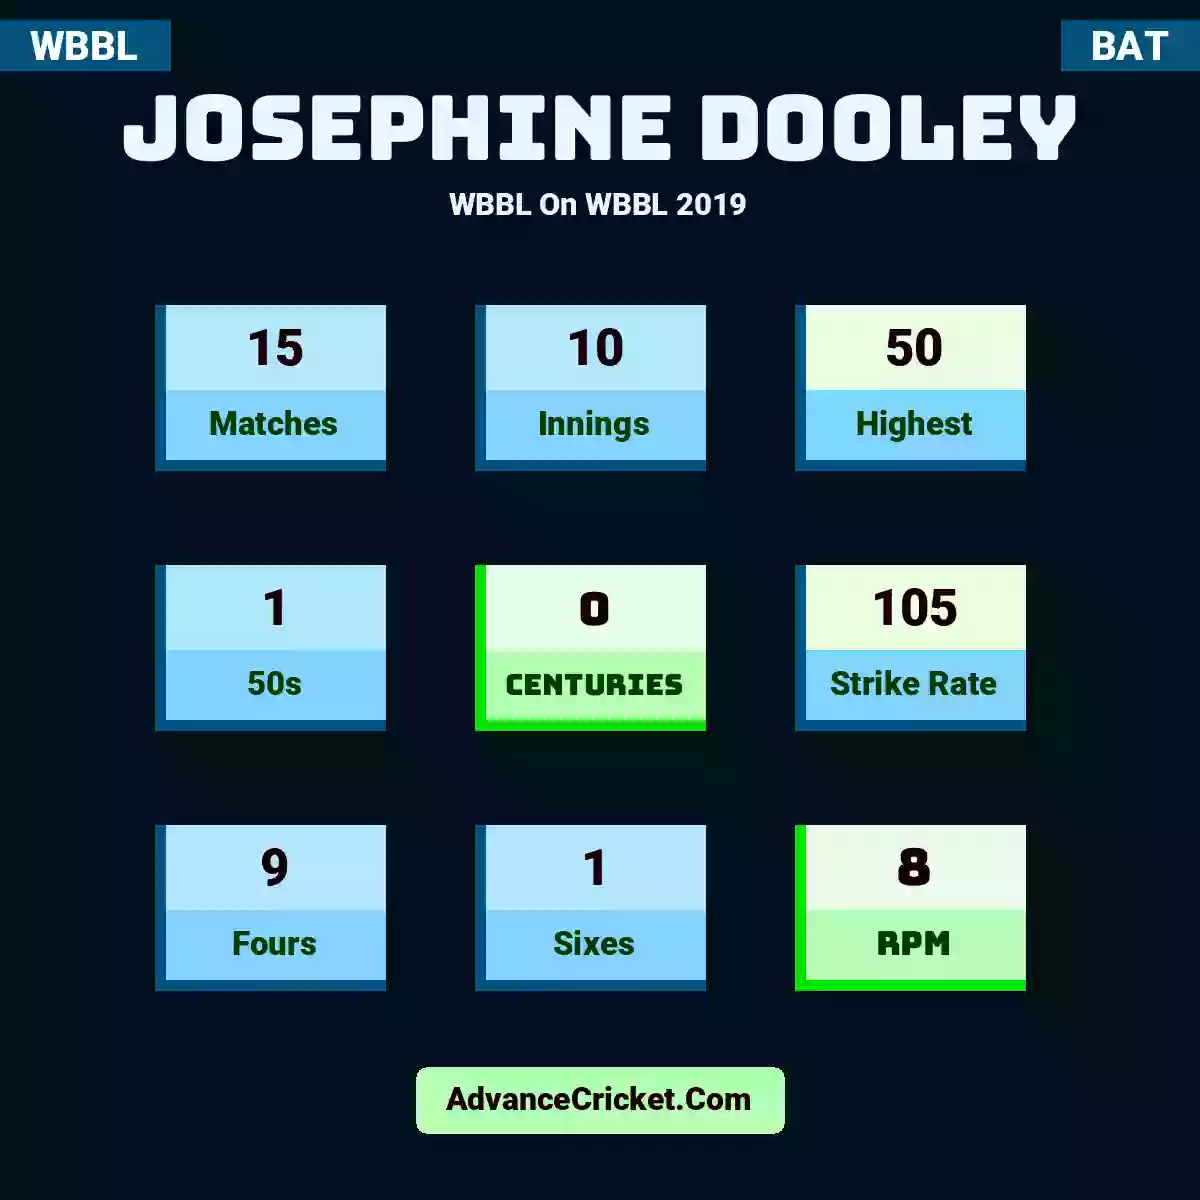 Josephine Dooley WBBL  On WBBL 2019, Josephine Dooley played 15 matches, scored 50 runs as highest, 1 half-centuries, and 0 centuries, with a strike rate of 105. J.Dooley hit 9 fours and 1 sixes, with an RPM of 8.